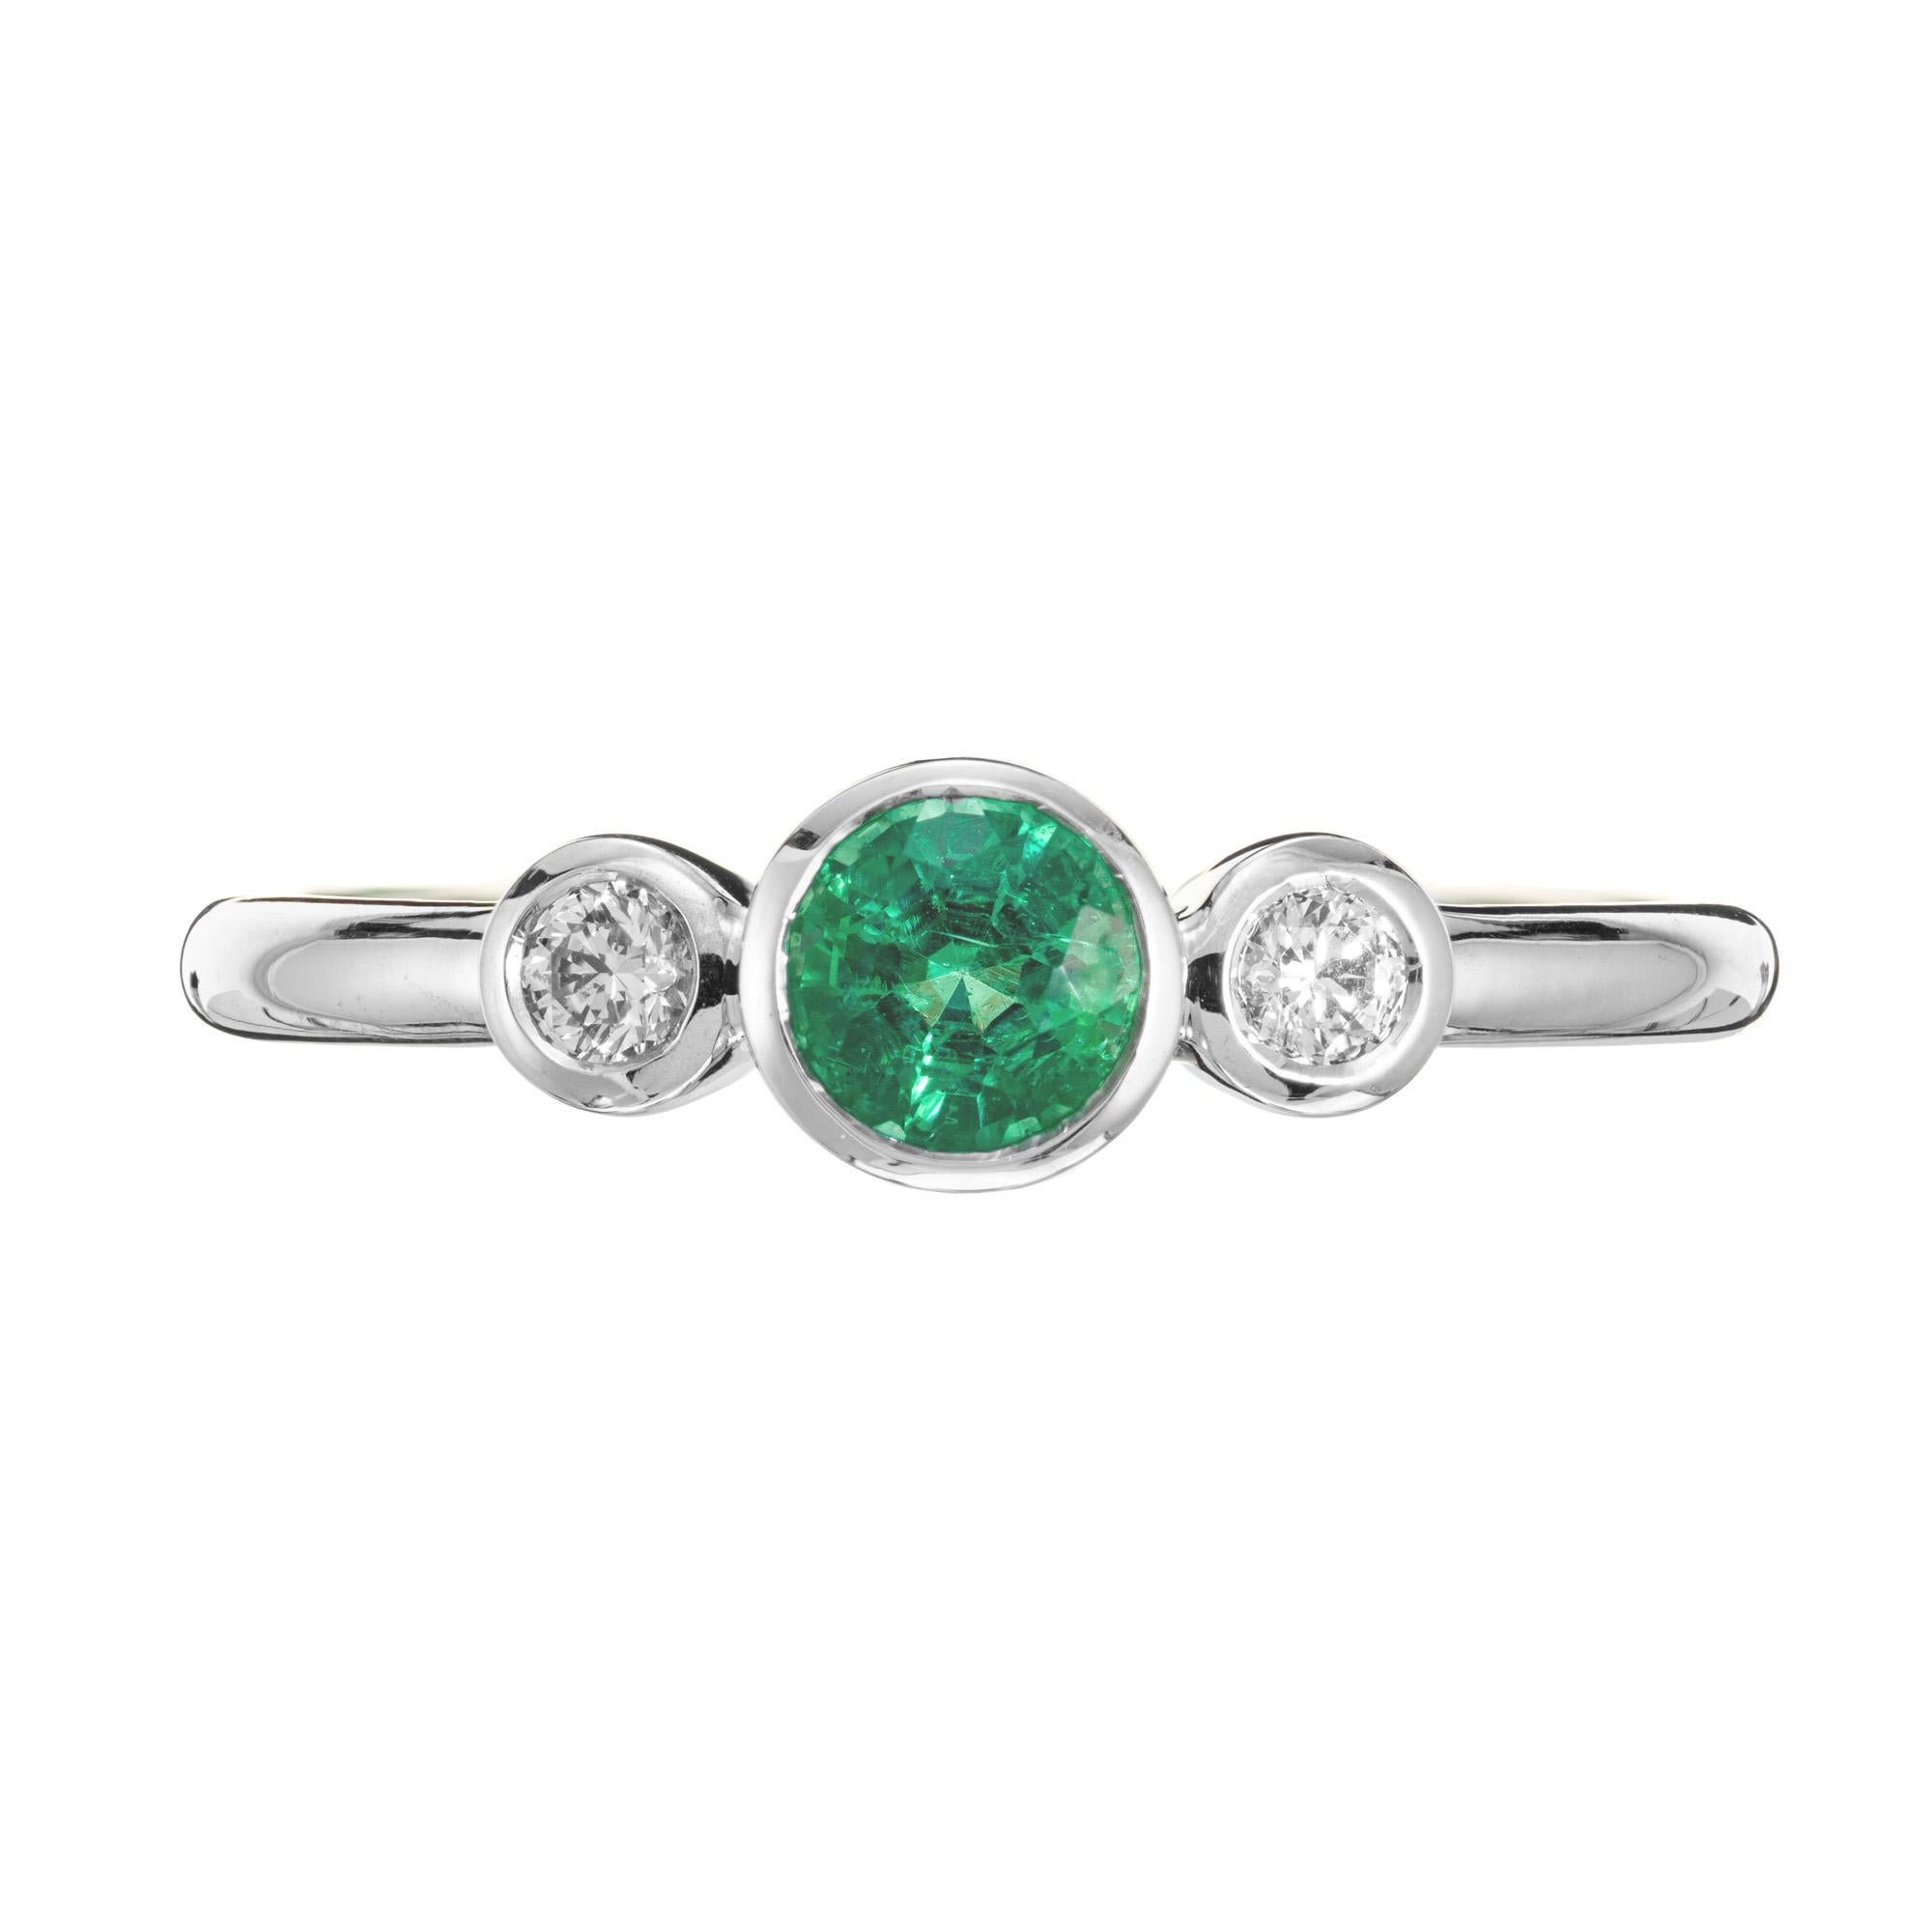 Emerald diamond gold engagement ring. .39ct round bezel set emerald with 2 round side diamonds in a 18k white gold setting. Designed and crafted in the Peter Suchy workshop.

1 round green emerald, approx. .39cts
2 round diamonds, H-I SI approx.